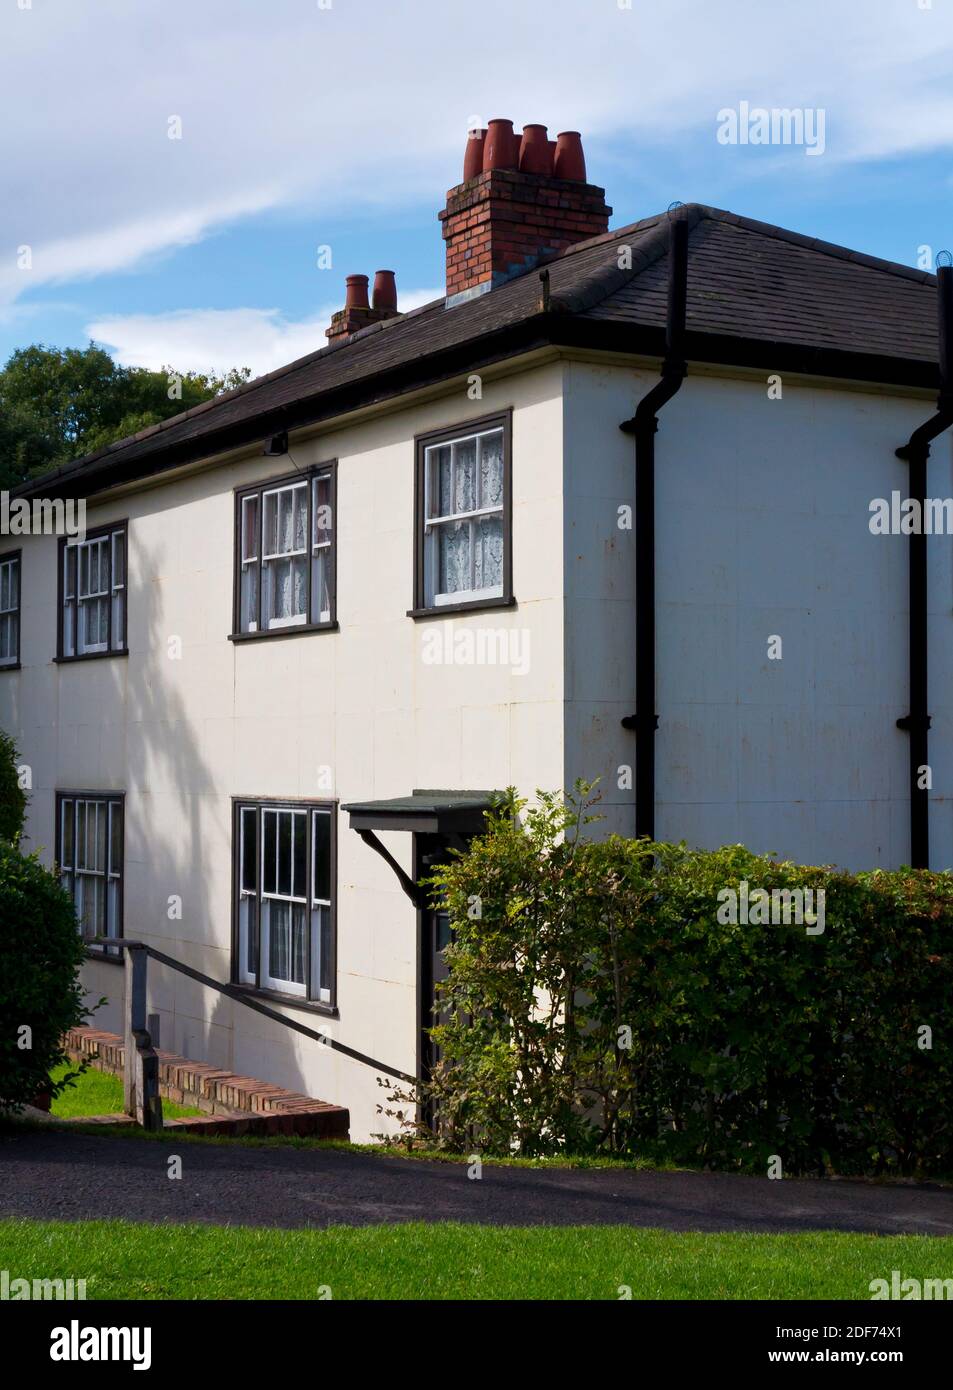 Experimental cast iron houses built in Dudley in 1925 constructed with cast iron panels lined with asbestos at the Black Country Living Museum UK Stock Photo